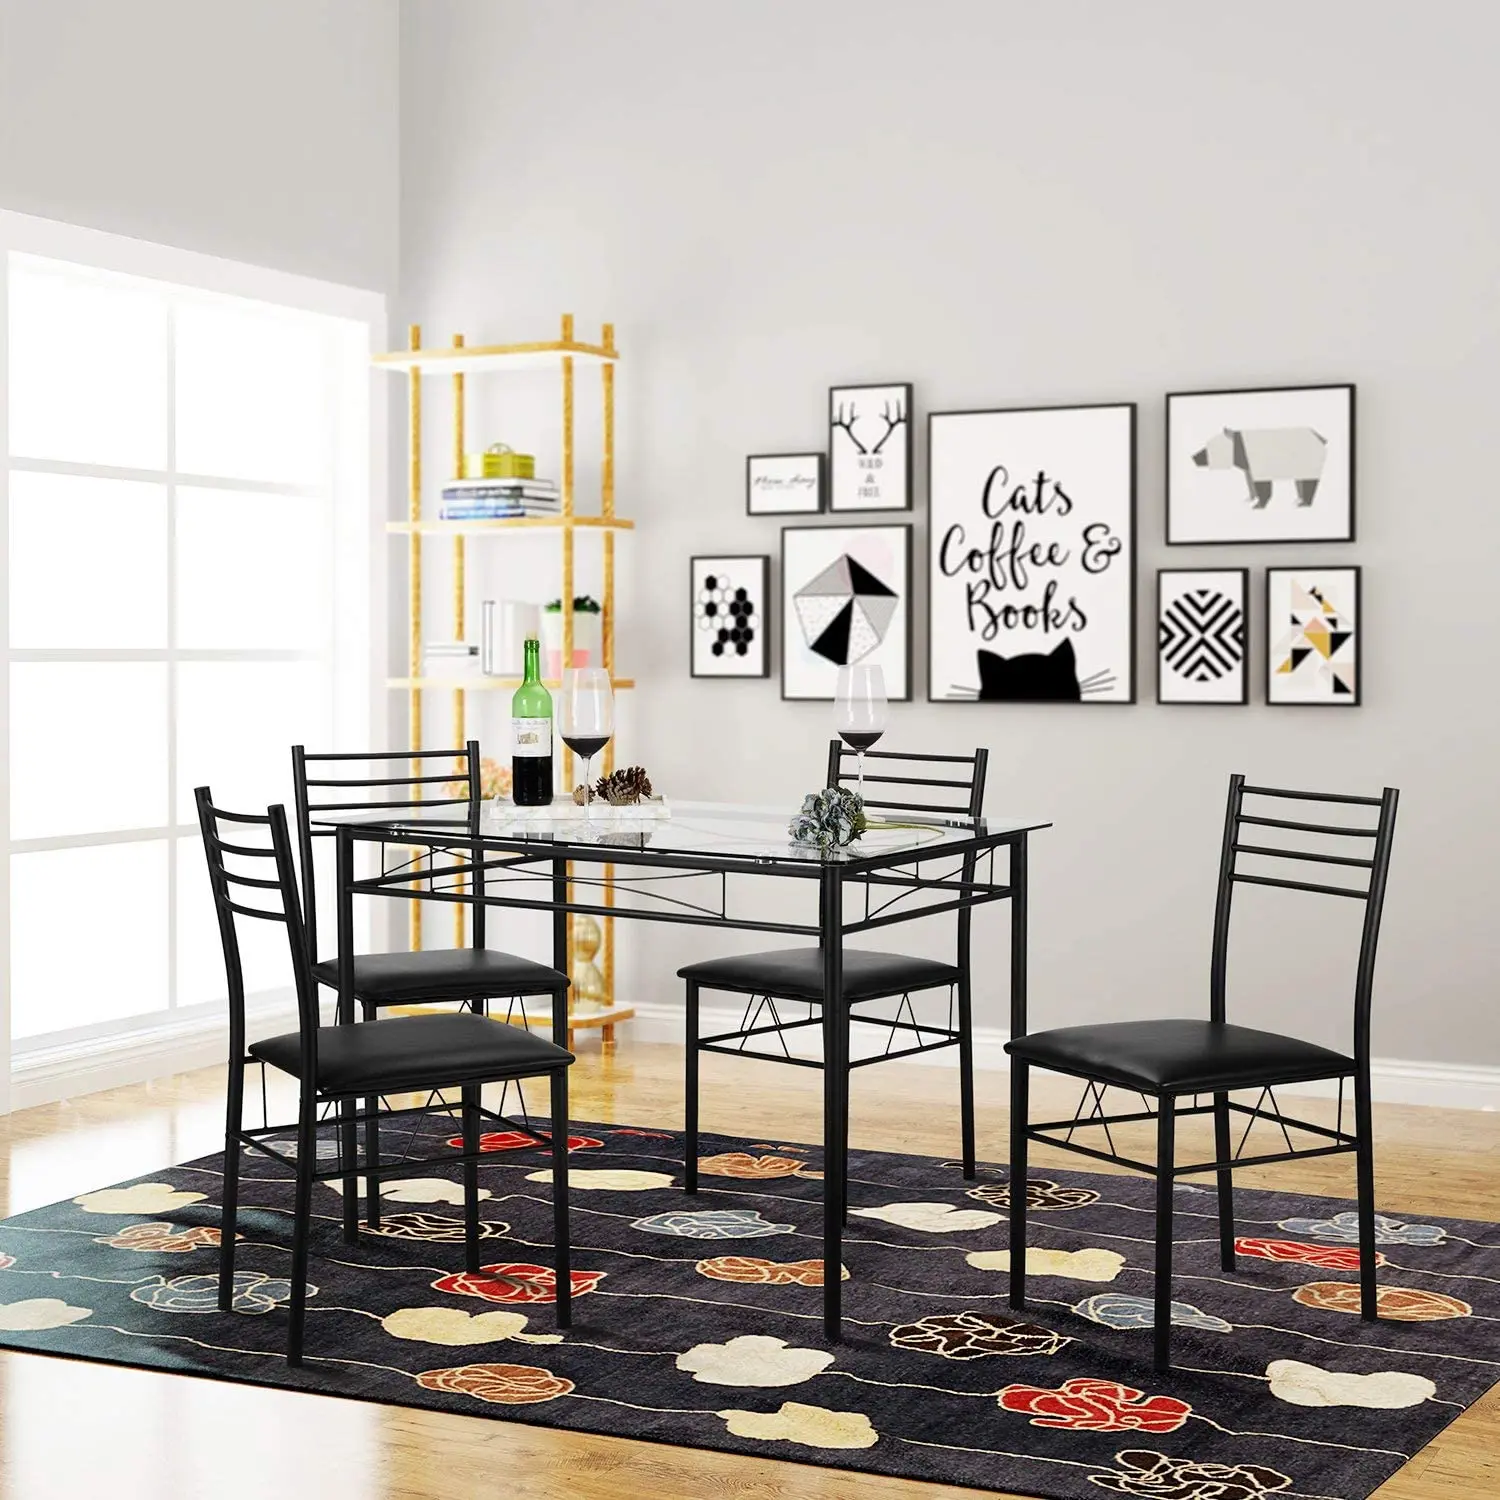 Dining Table with 4 Chairs 4 Placemats Included, practical furniture for home ,glass material